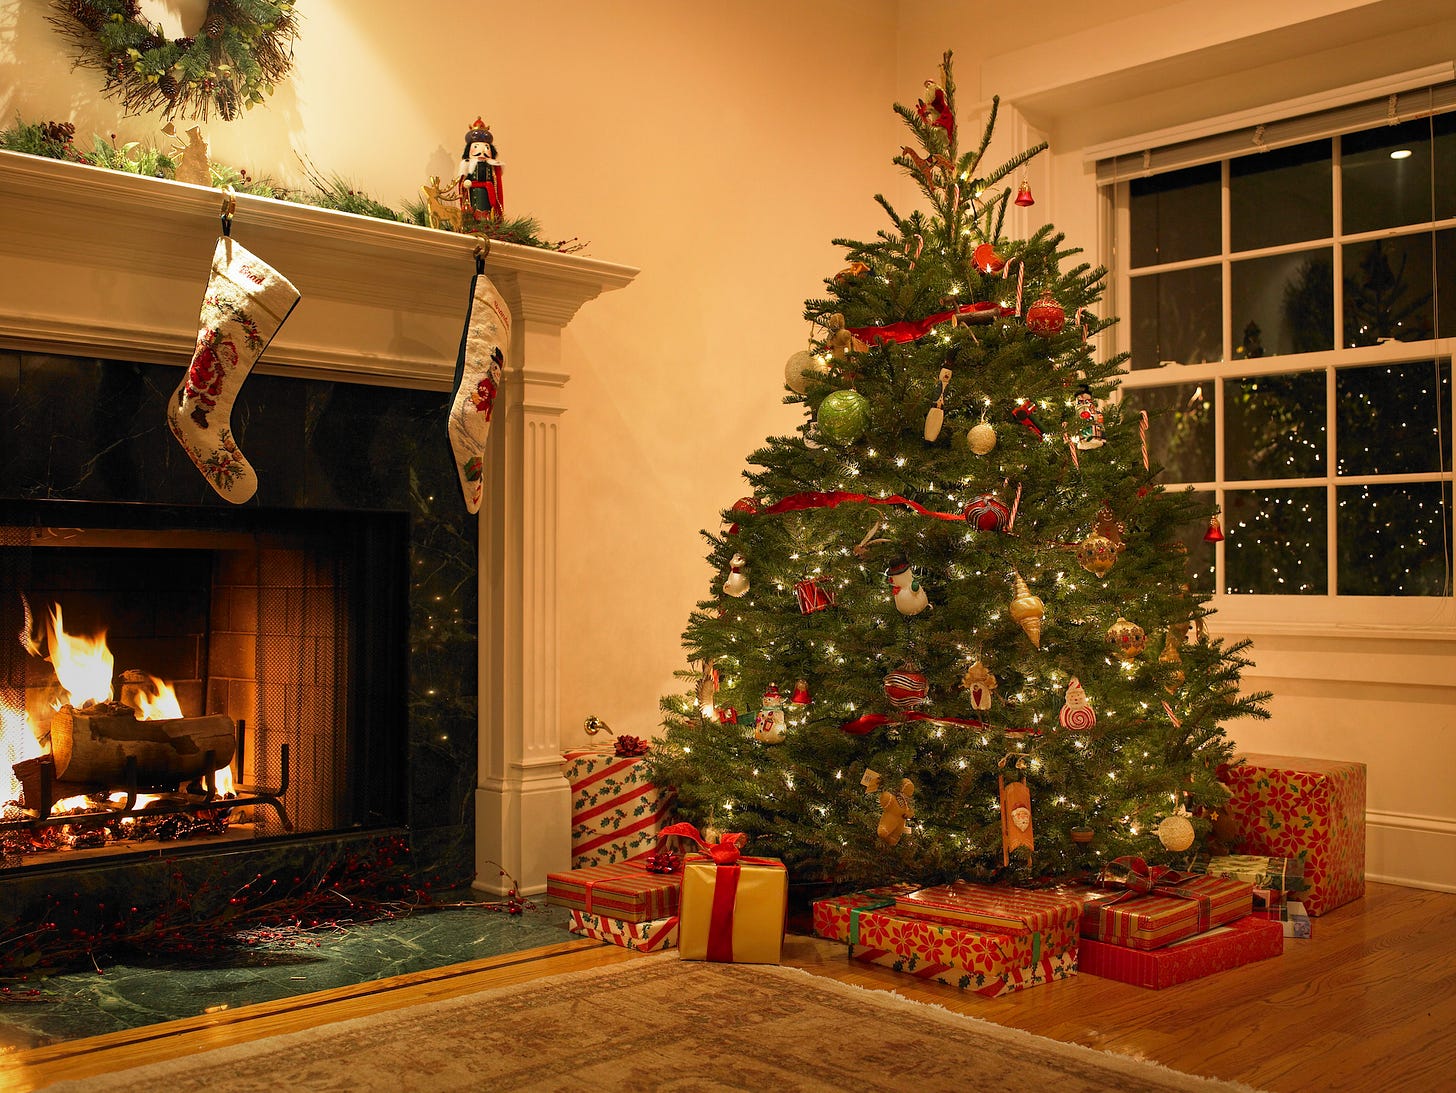 A Christmas tableau of a cosy home with a beautifully directed Christmas tree, under which are many wrapped presents. To the left of the tree, a warm fire, stockings hanging from the mantle.